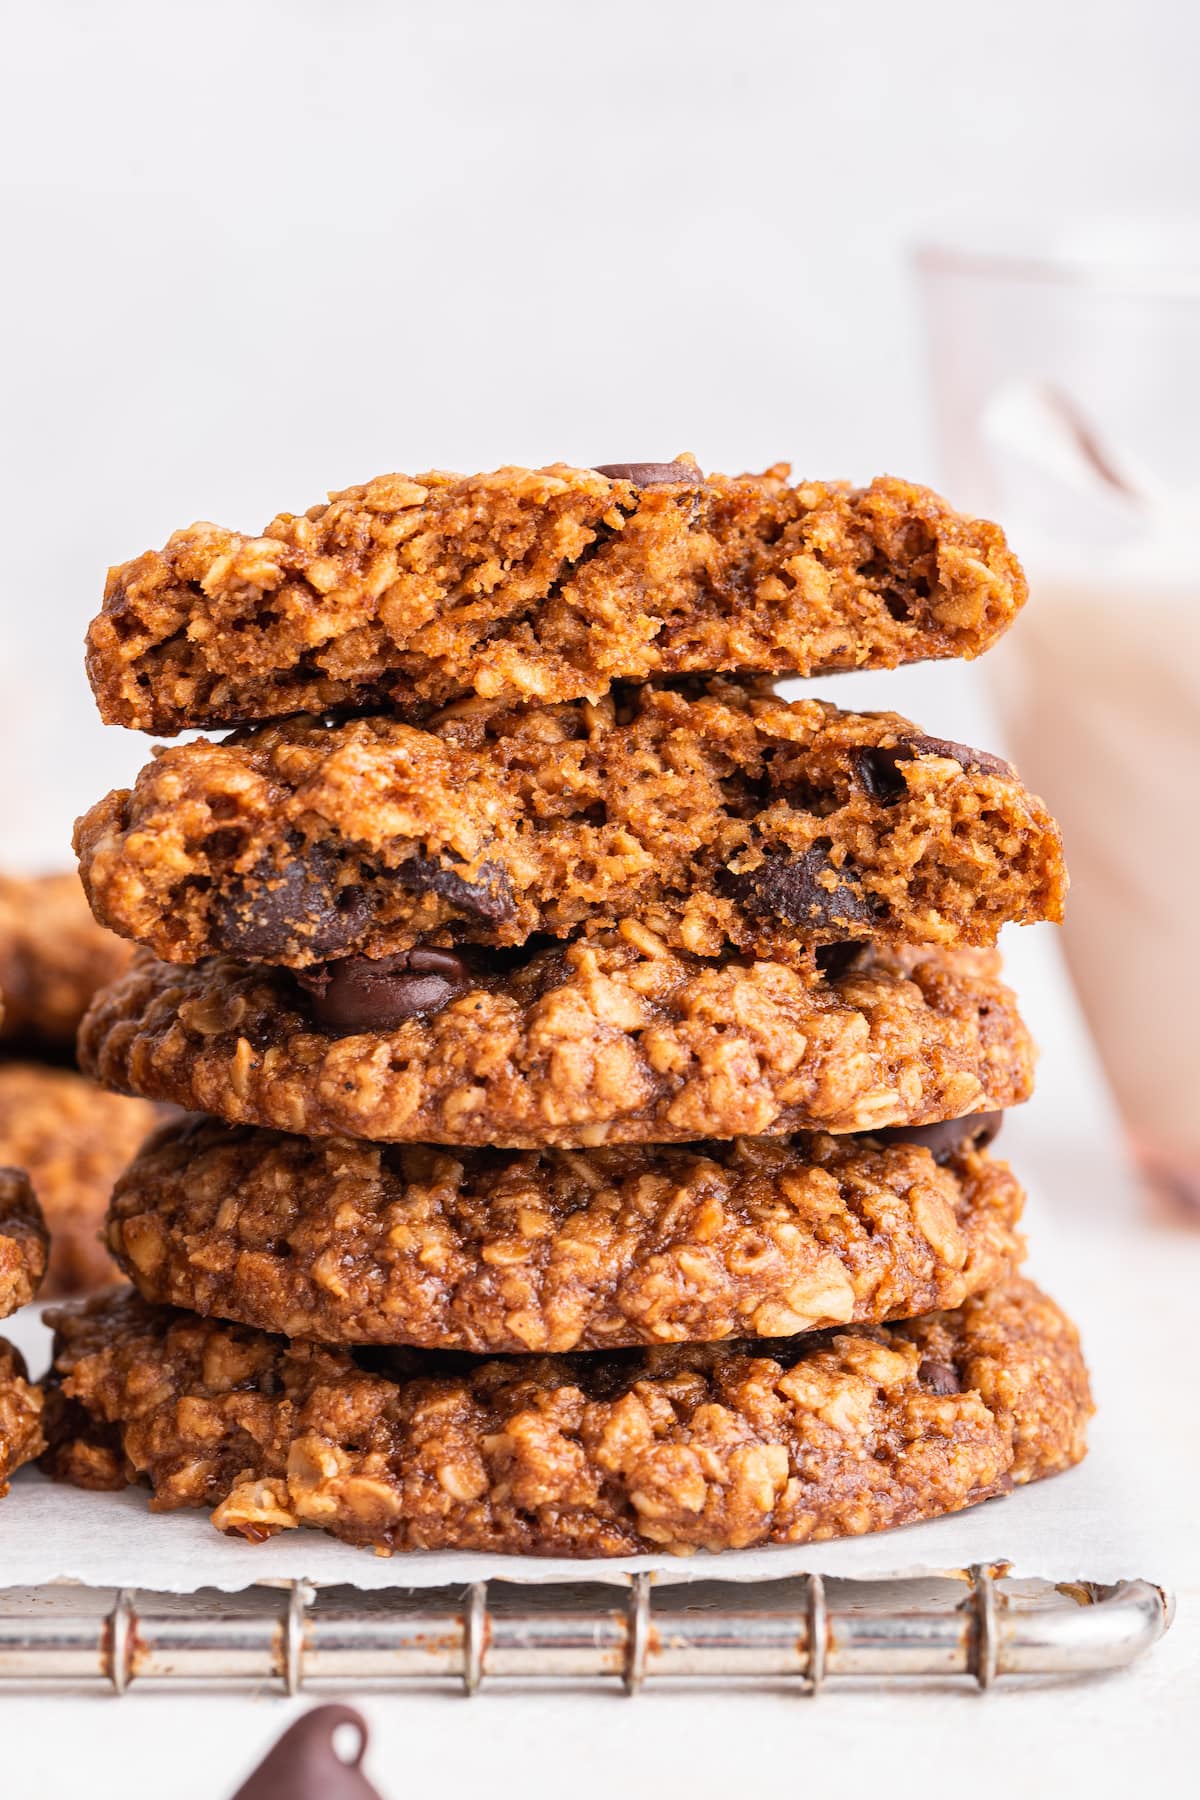 Five lactation cookies stacked on one another with a bite taken from the top two.